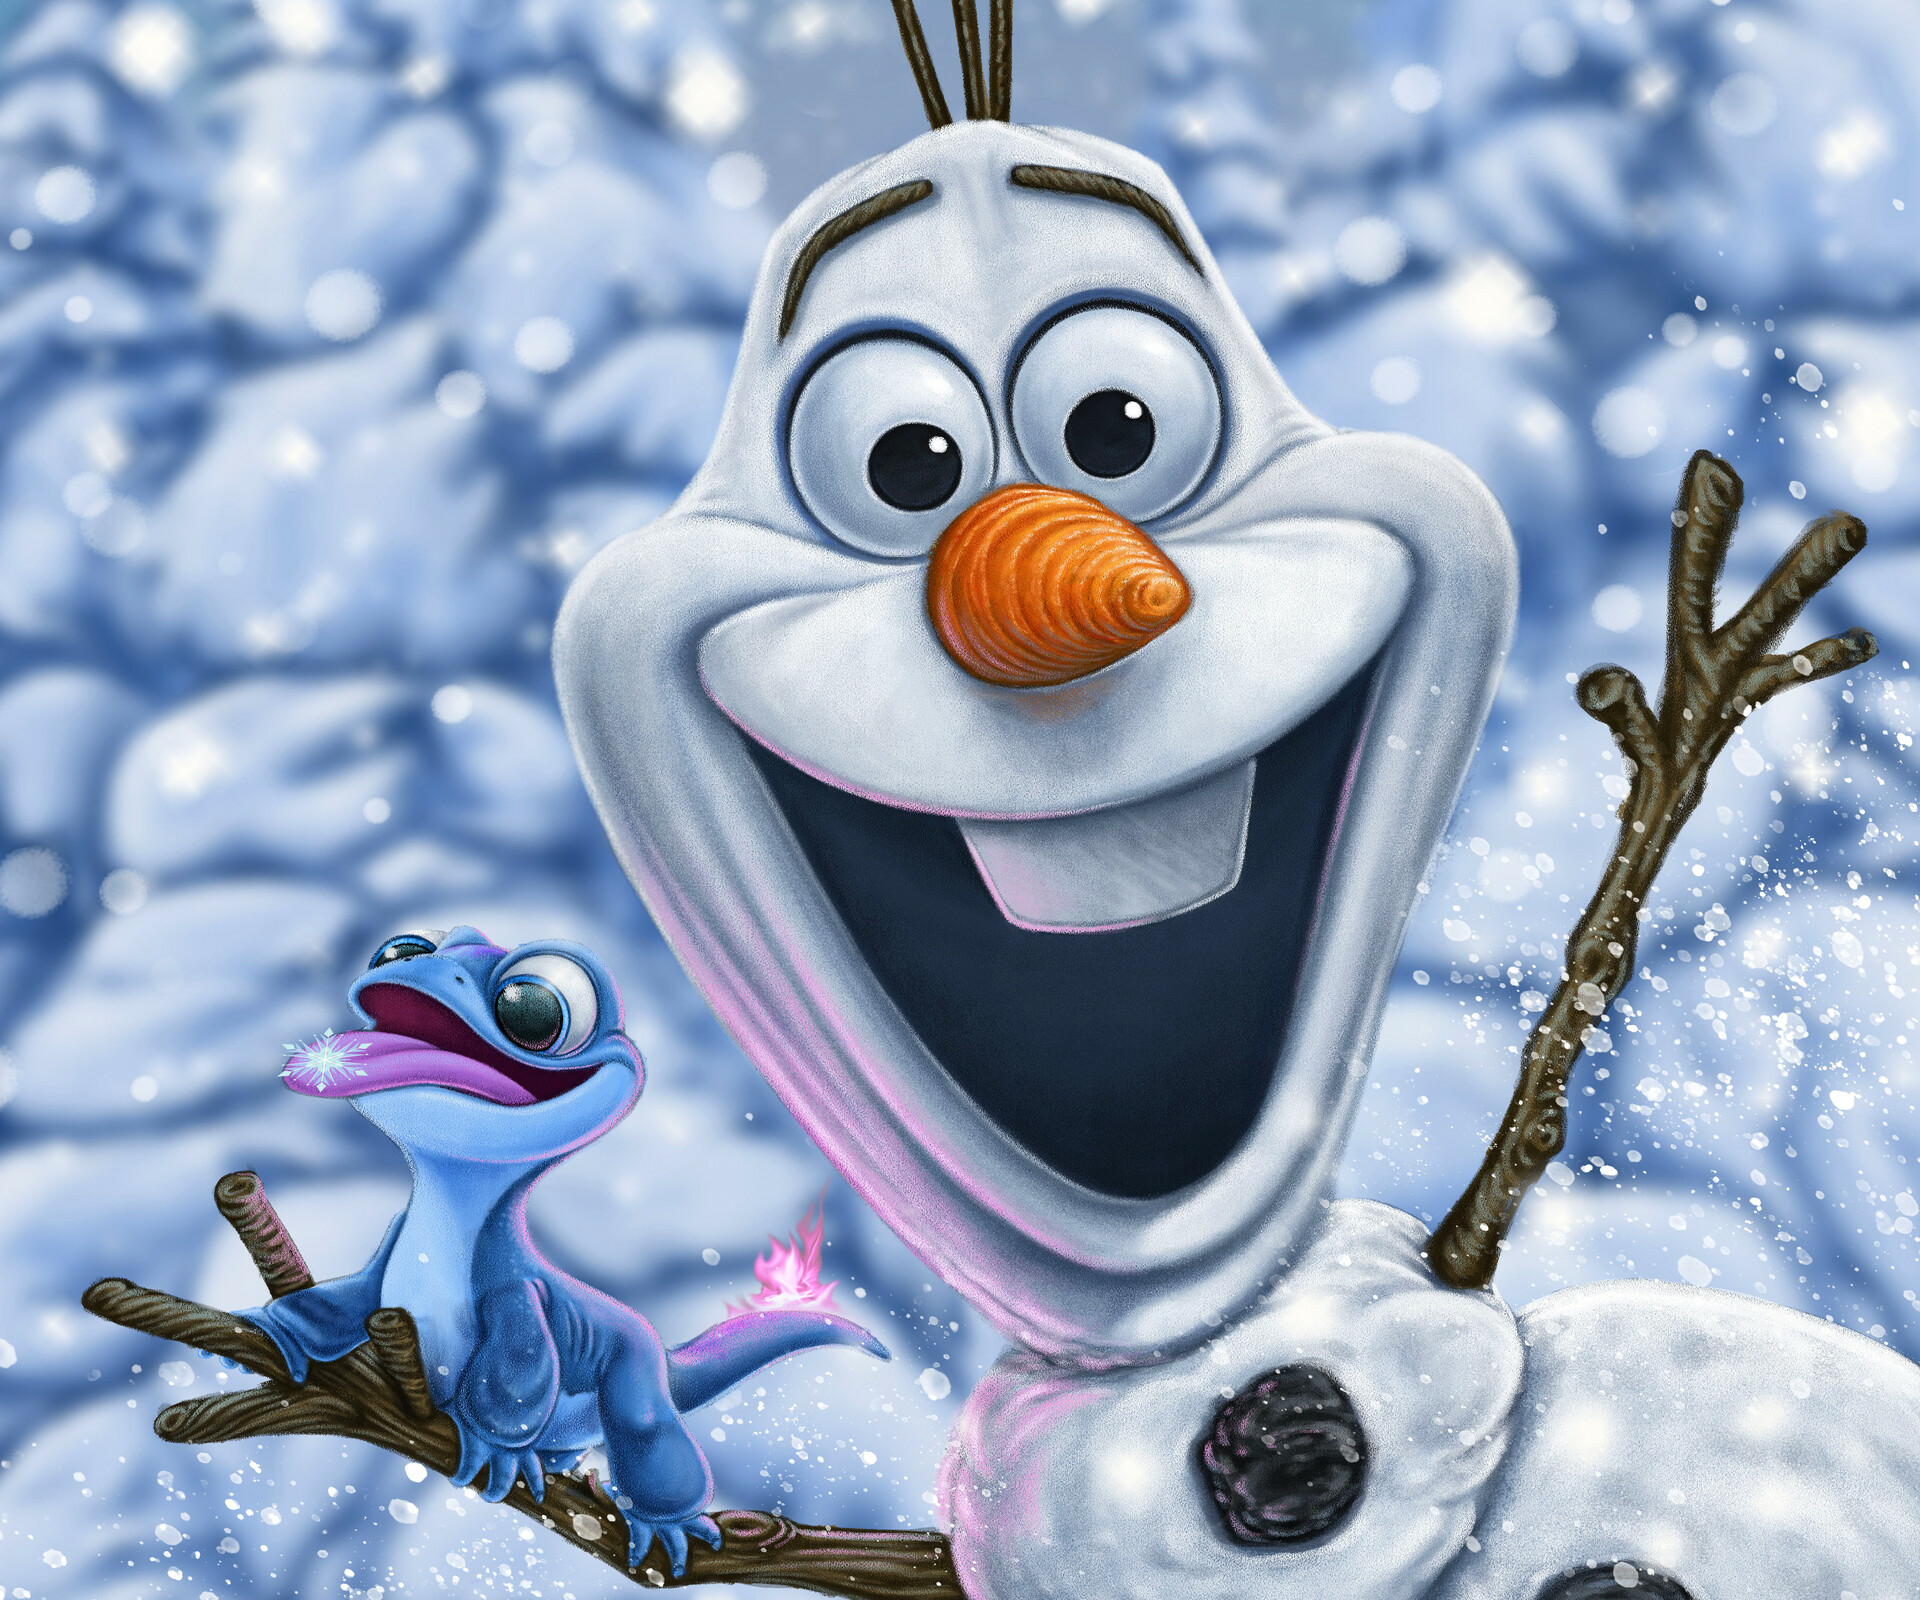 Olaf the Snowman and Bruni the Lizard by Eric Lutsepp